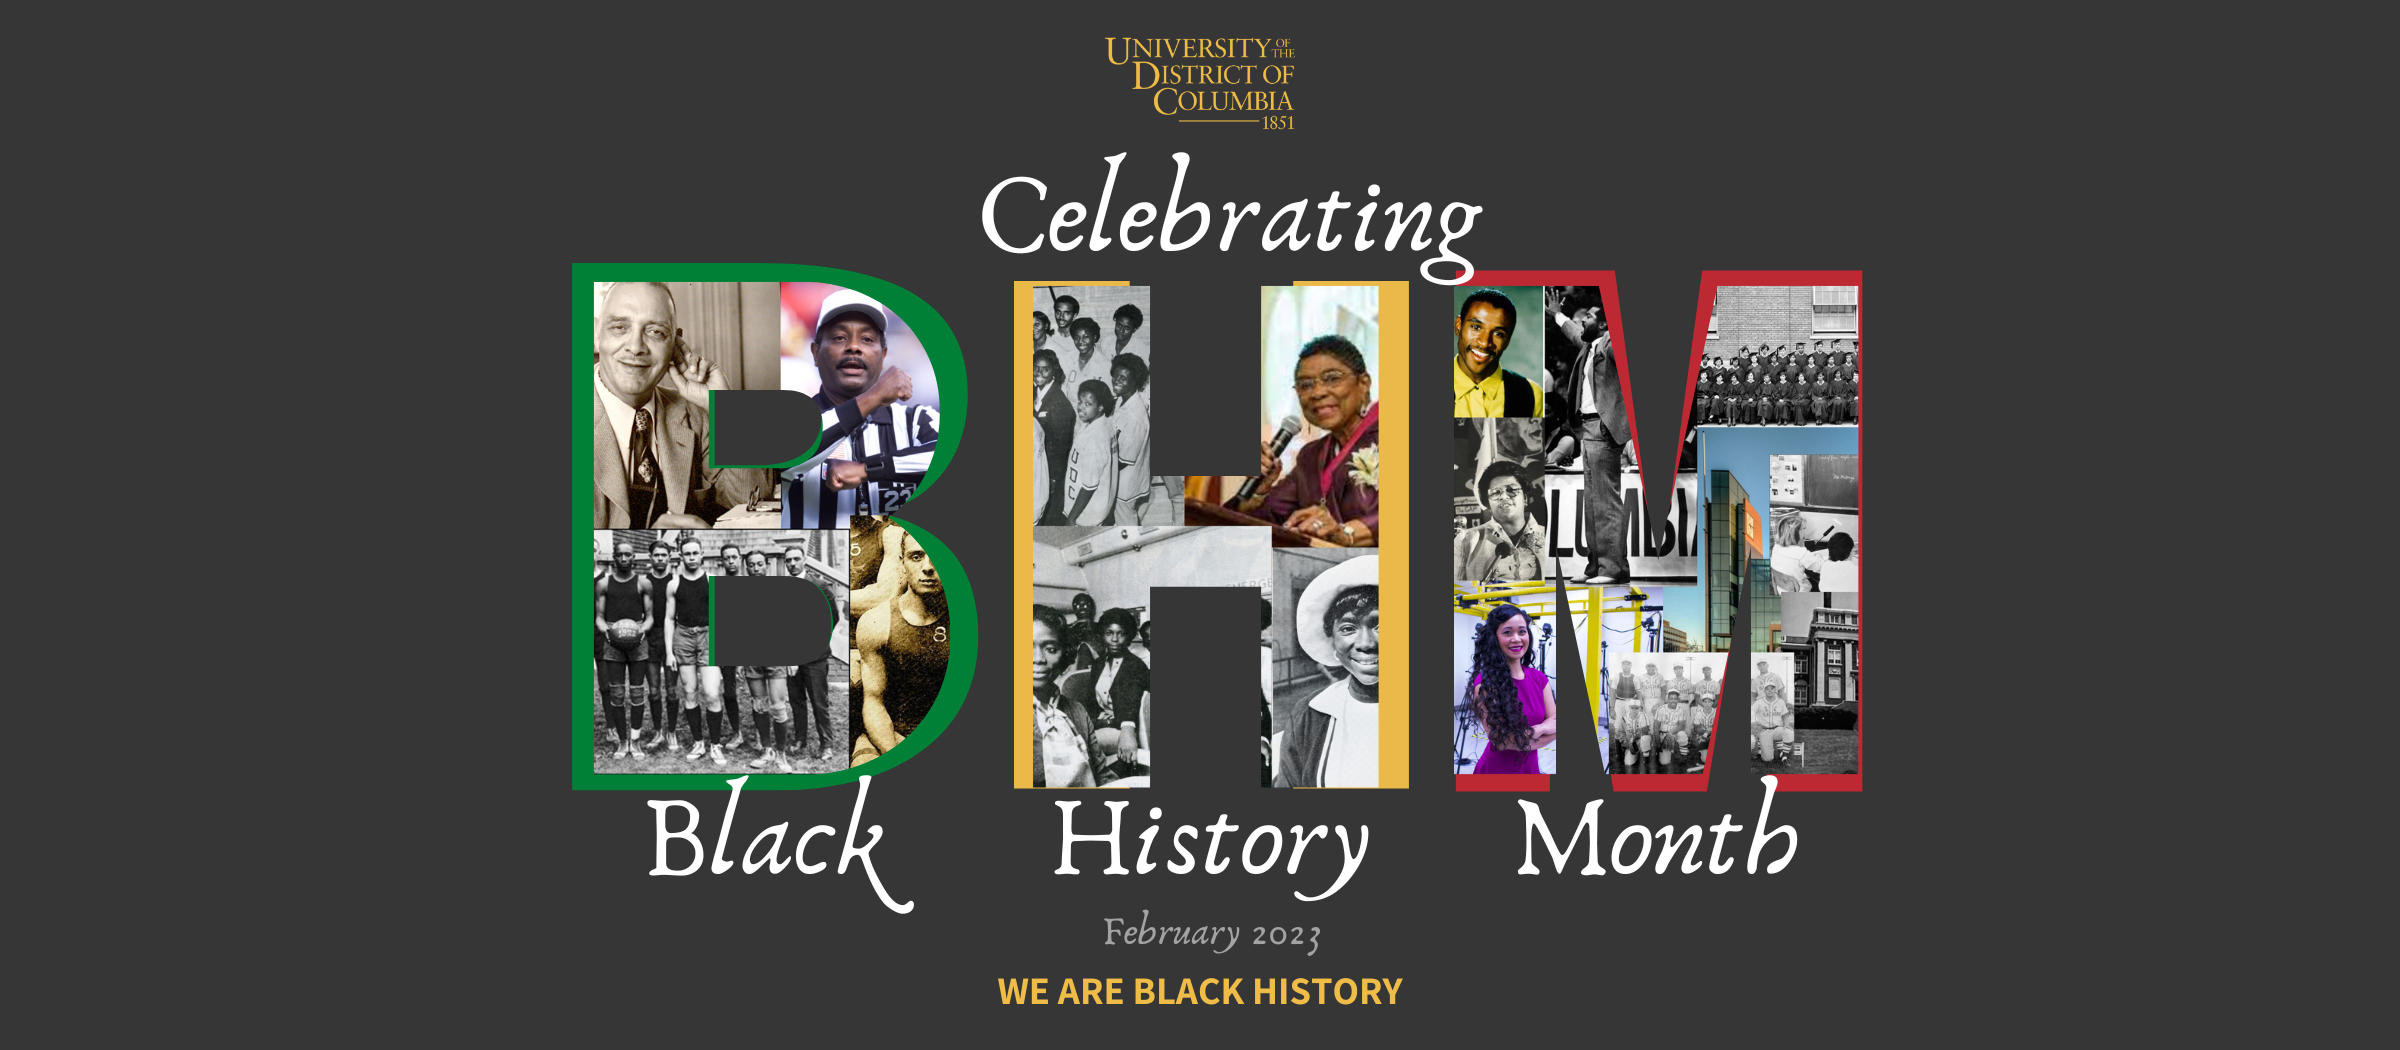 In February, we celebrate Black History Month. In February, we celebrate us.